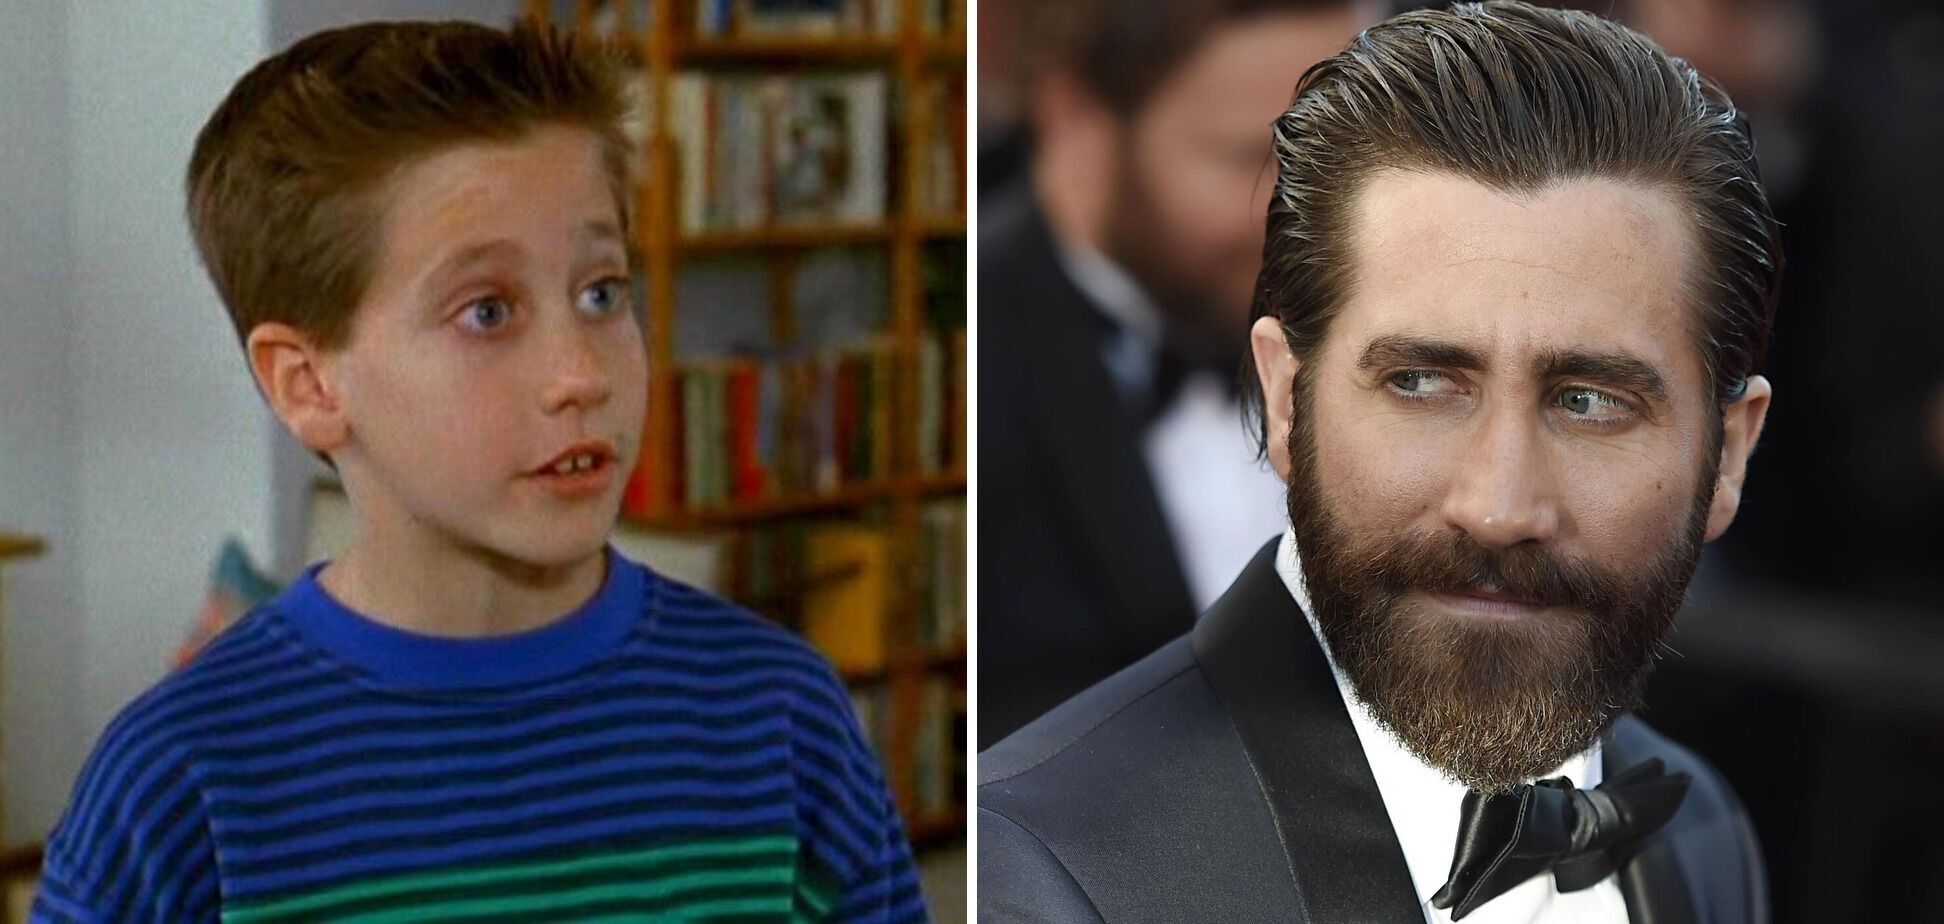 Years fly: how changed actors who became famous in childhood and are still starring in movies. Photo then and now